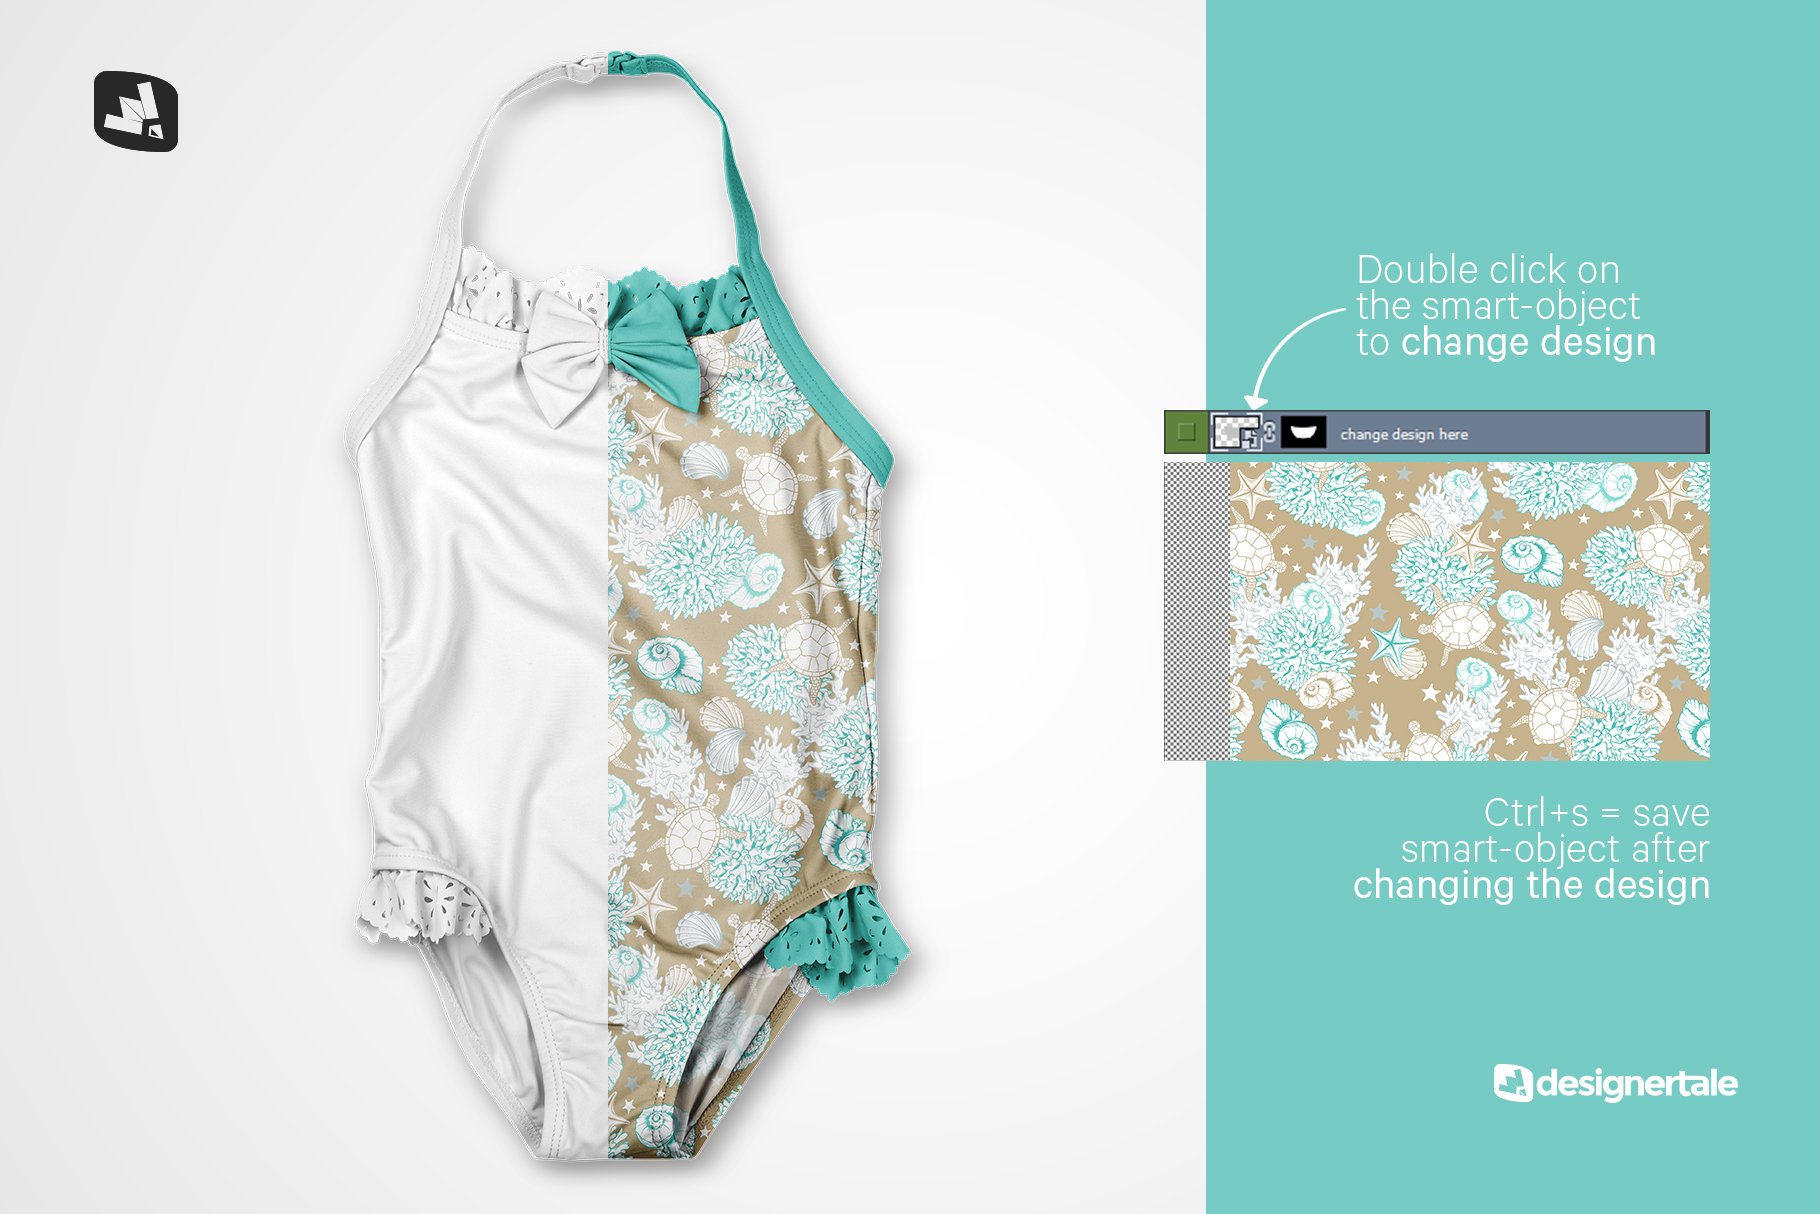 Backless Baby Swimsuit Mockup